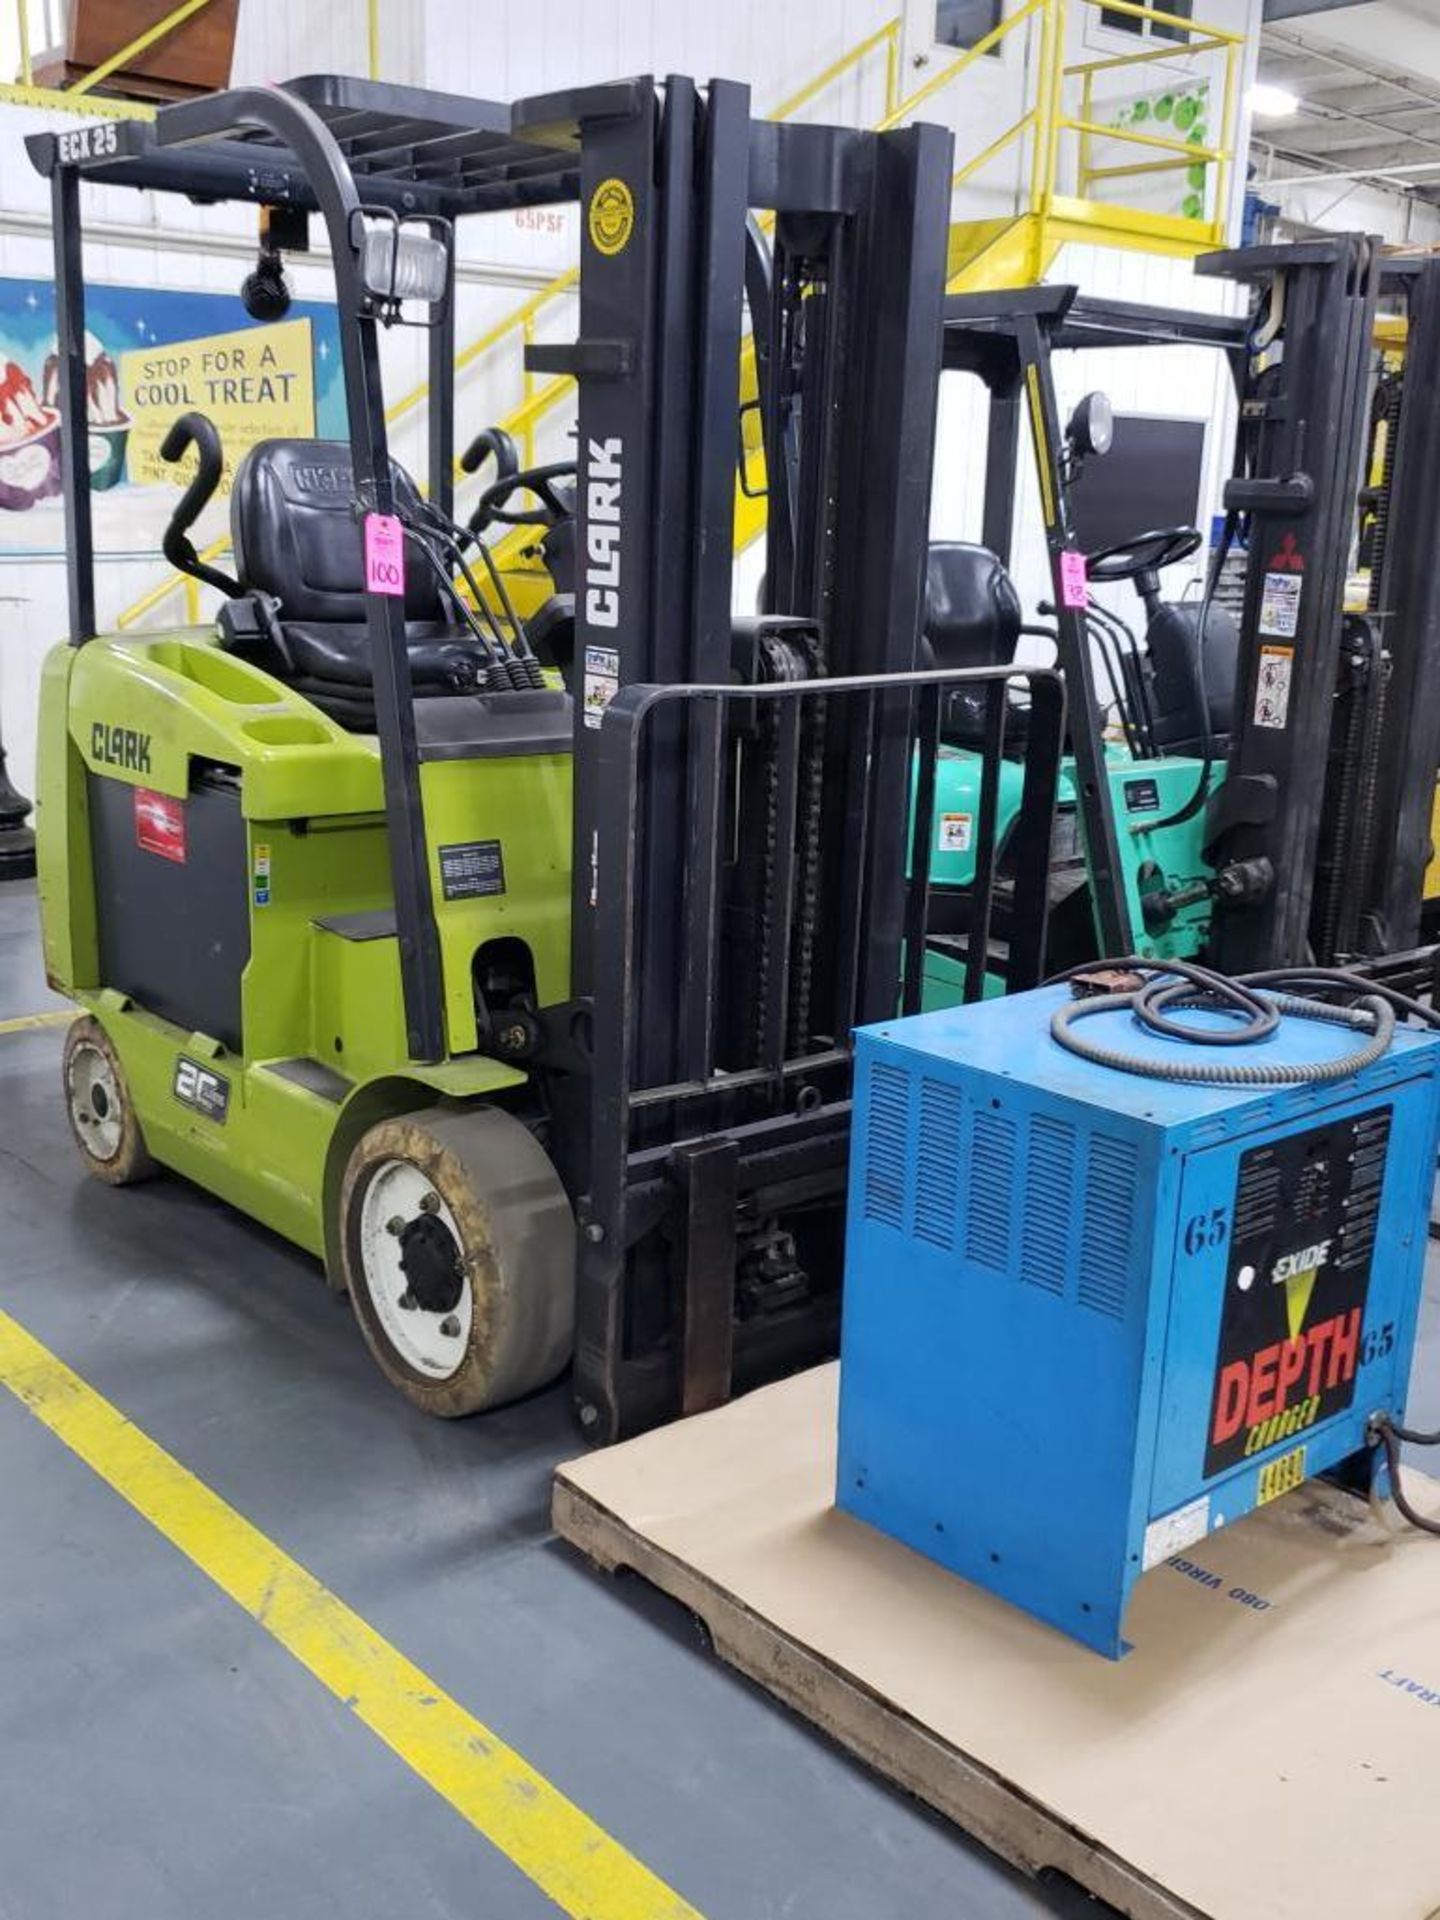 4800lb Clark electric forklift model ECX25. 3 stage 189 inch lift height with sideshift. 765hrs.